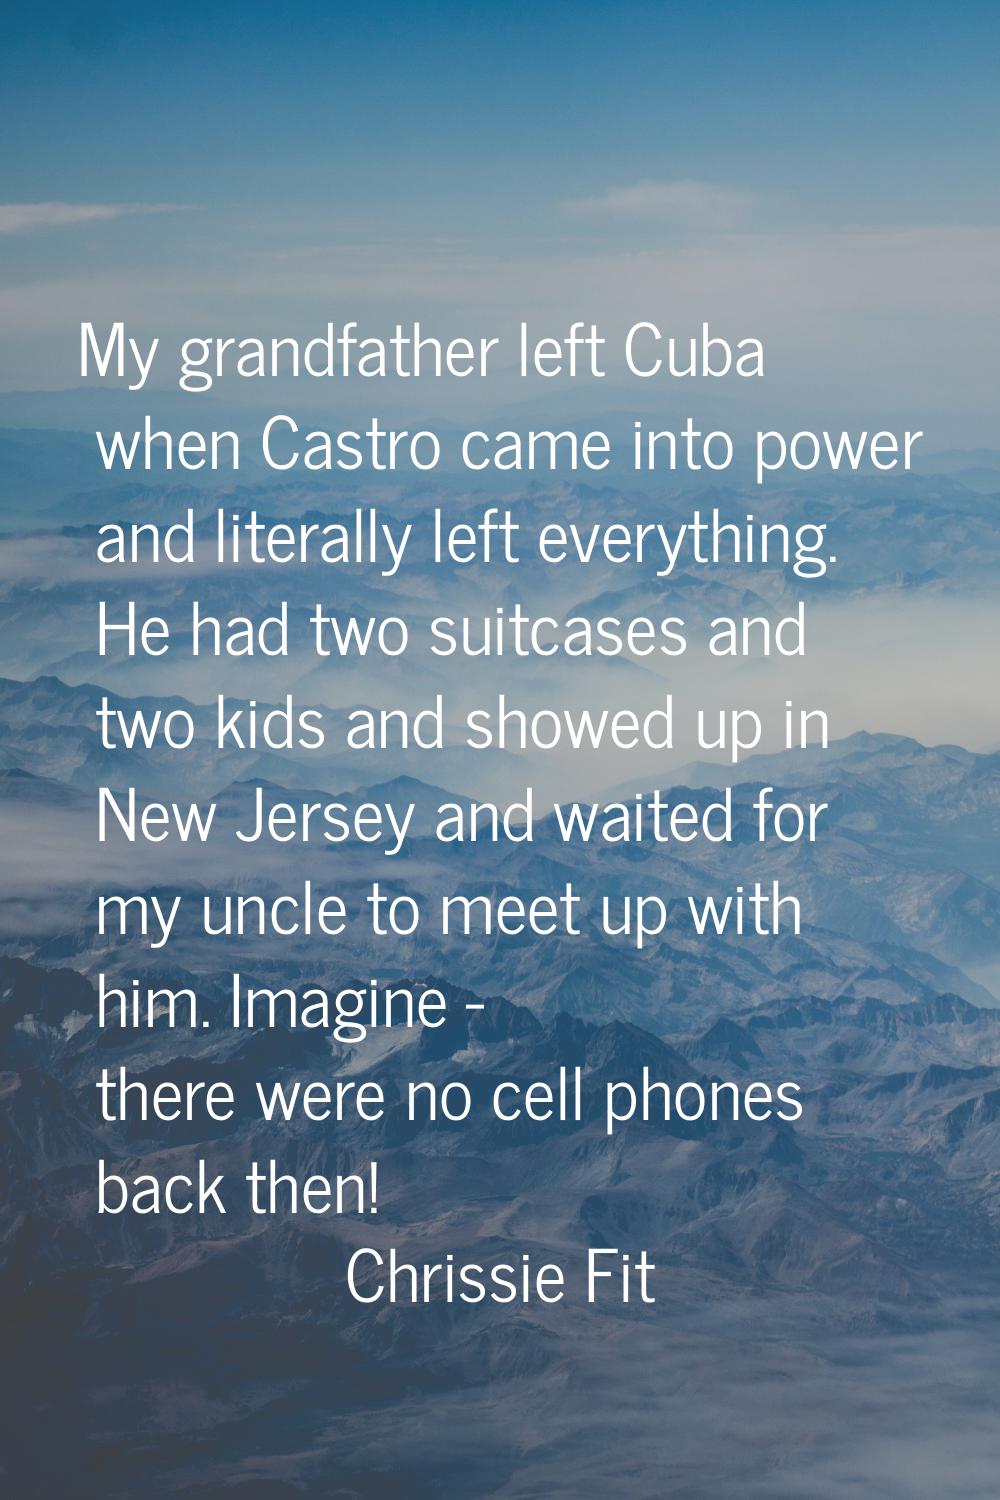 My grandfather left Cuba when Castro came into power and literally left everything. He had two suit